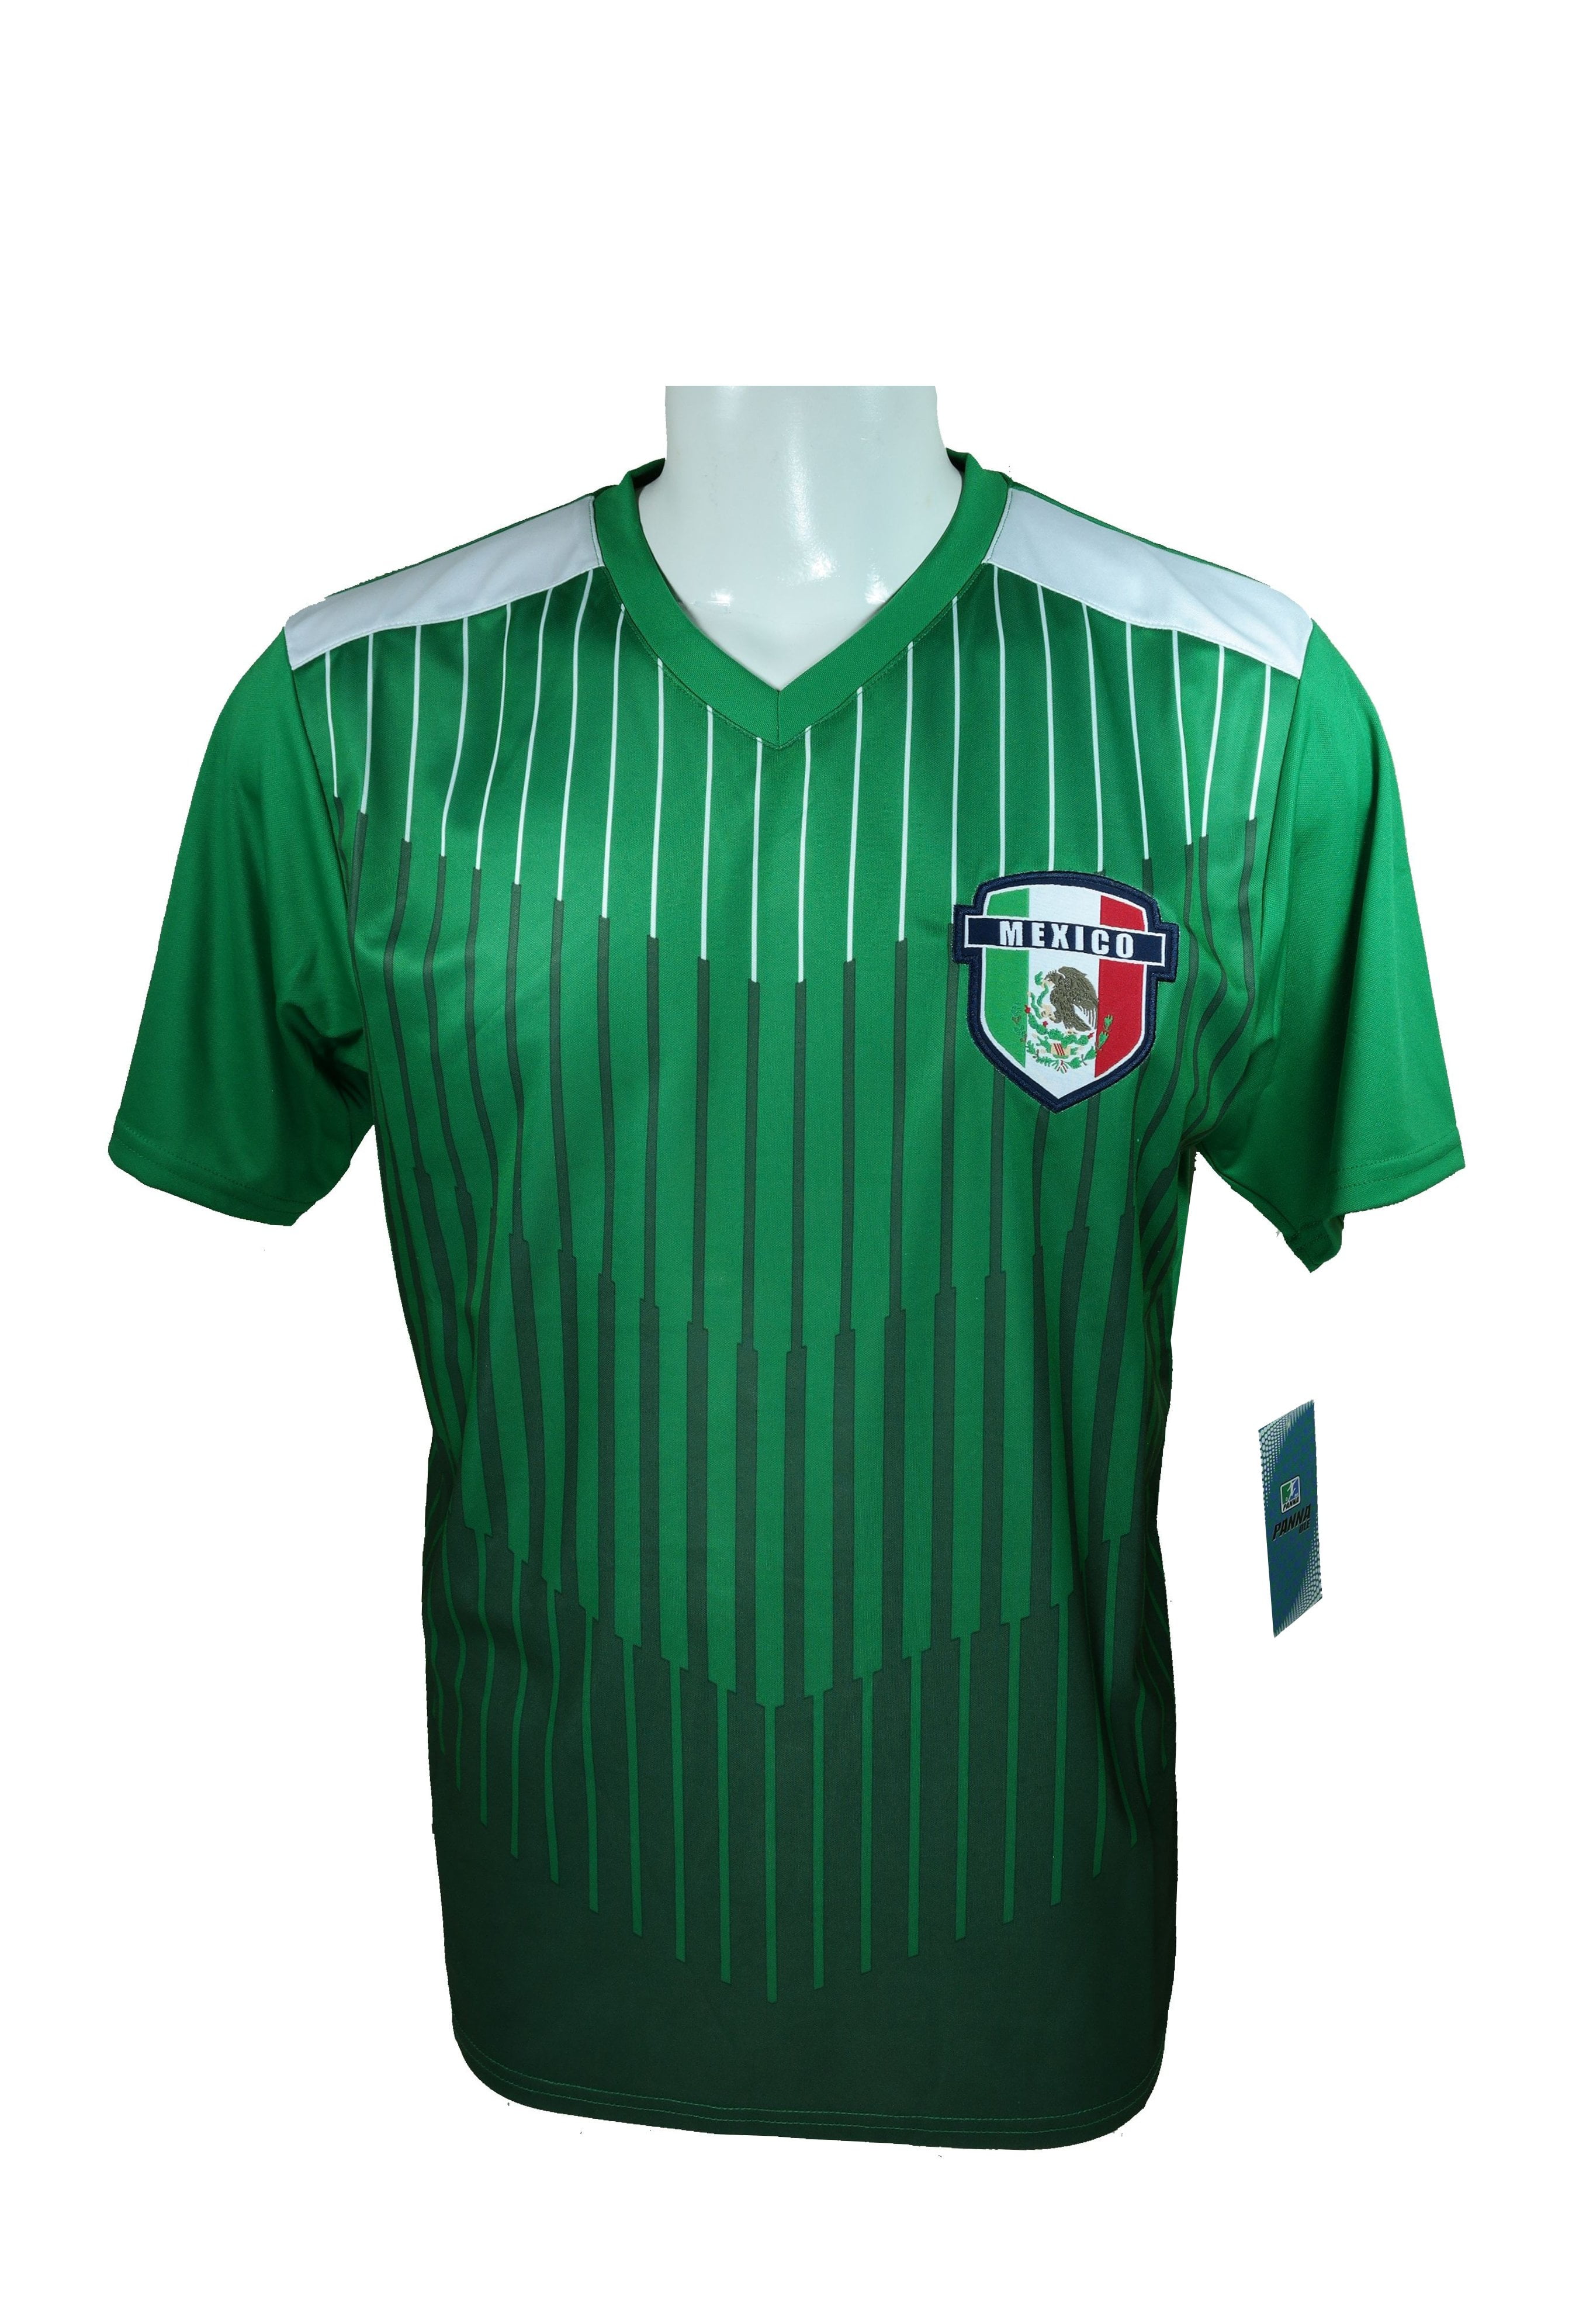 Panna Ole Soccer World Cup Adult Soccer Training Jersey P014 Large 